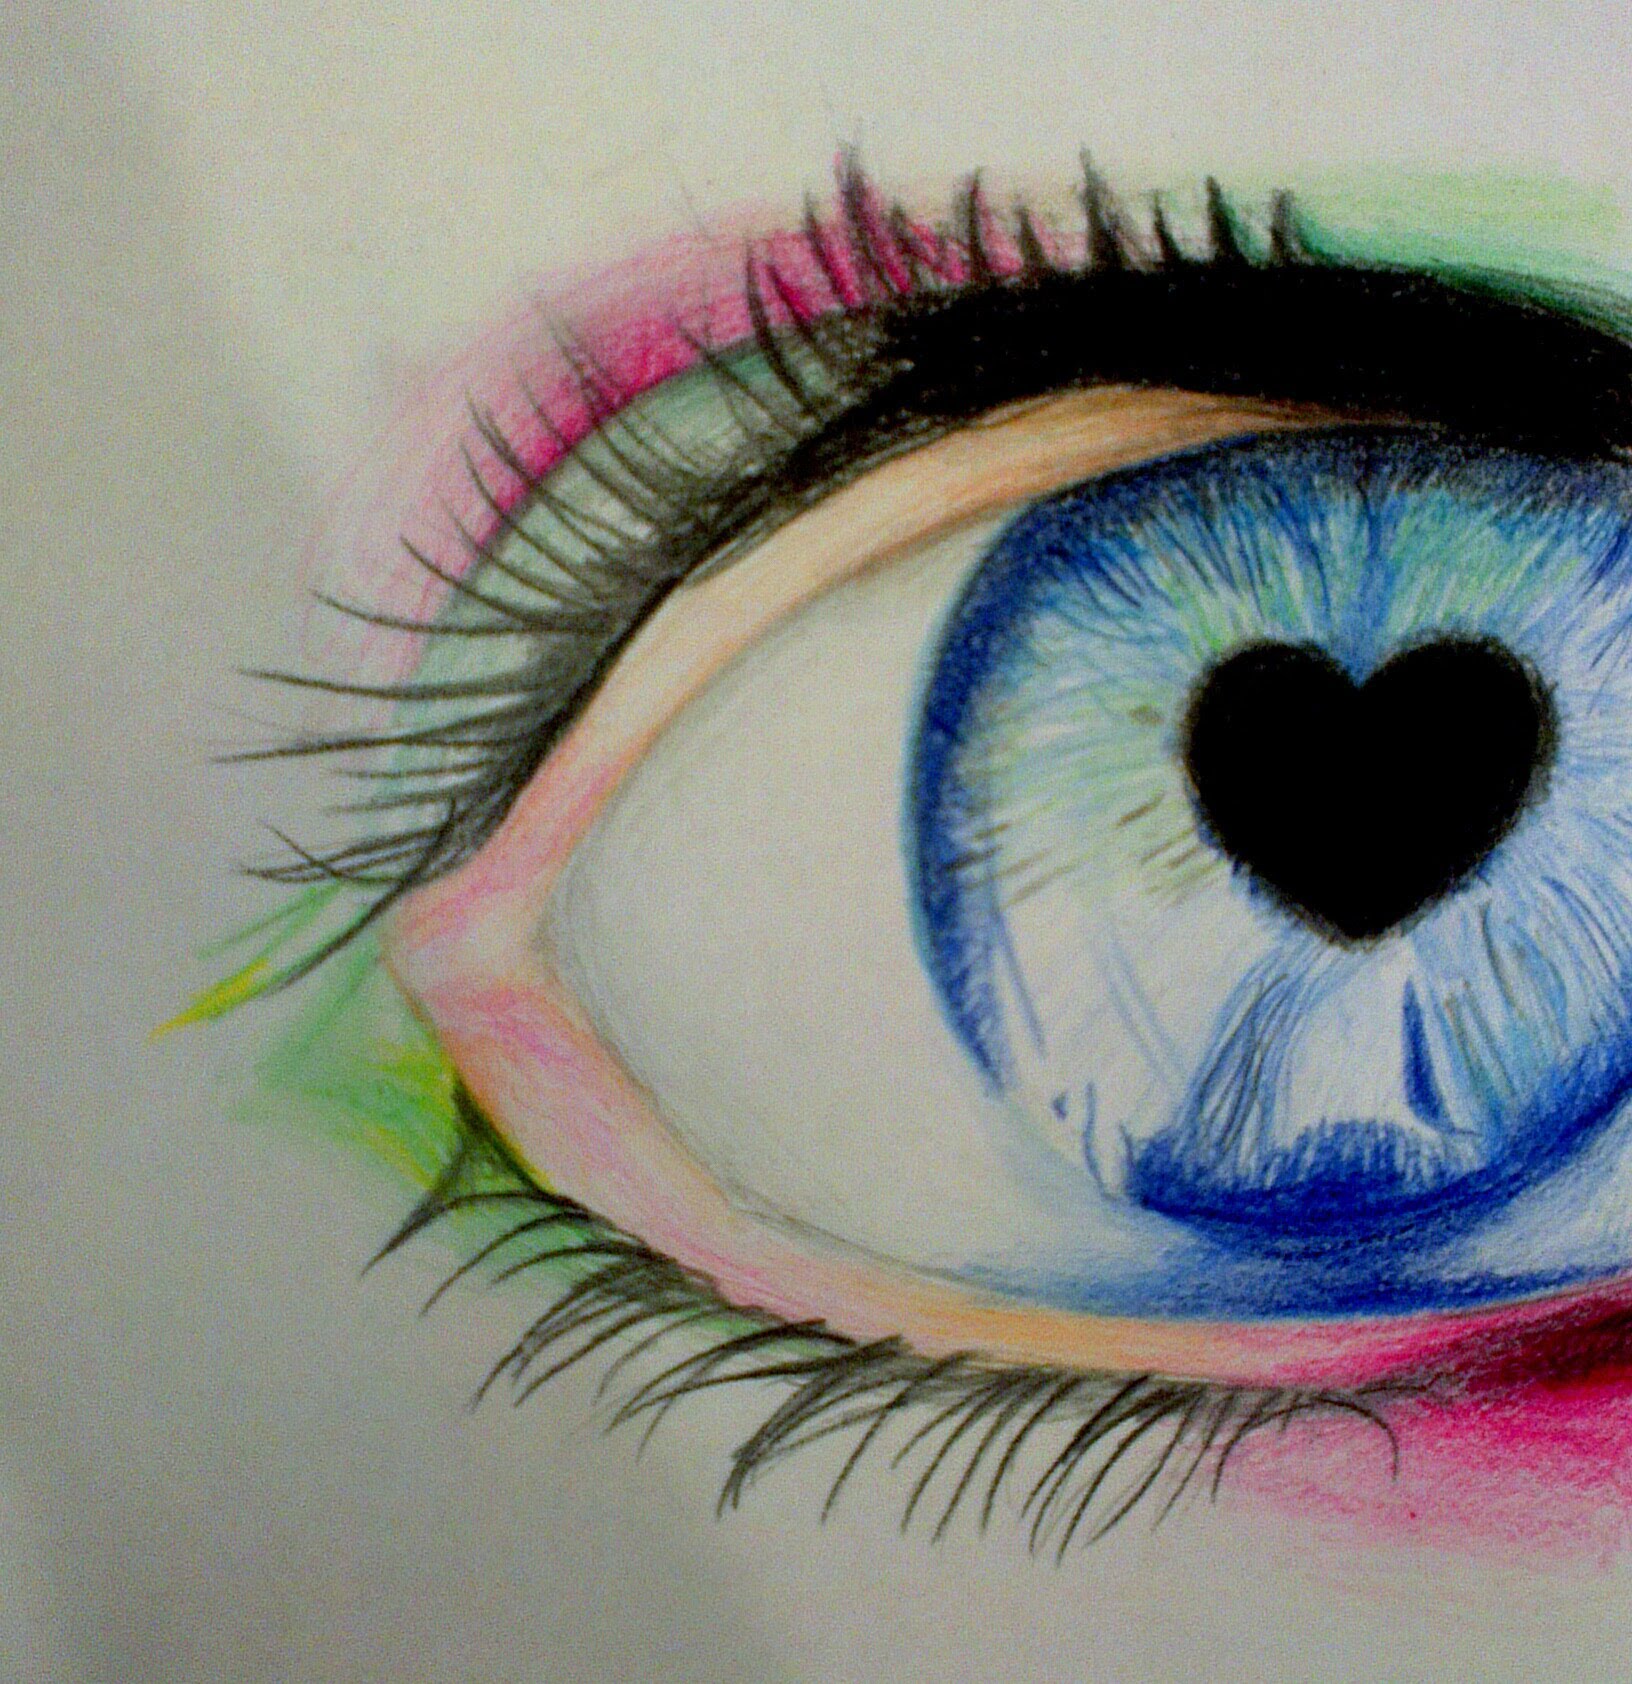 Abstract Eye Sketch at PaintingValley.com | Explore collection of ...